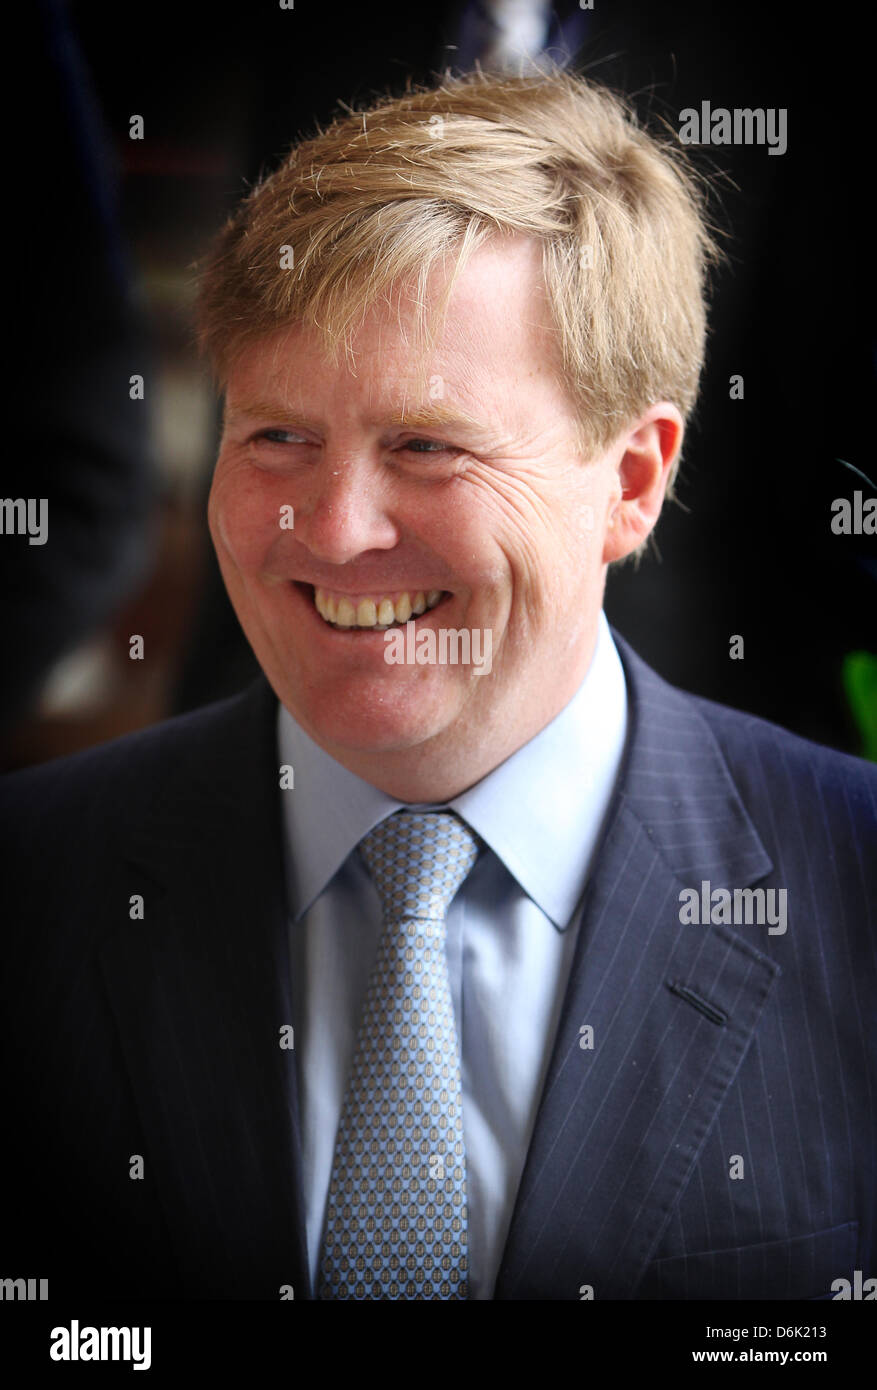 Prince Willem-Alexander visits the city hall, Centrumpost and the reformed church in Barendrecht, The Netherlands, 29 March 2012. Photo: Patrick van Katwijk - NETHERLANDS OUT Stock Photo